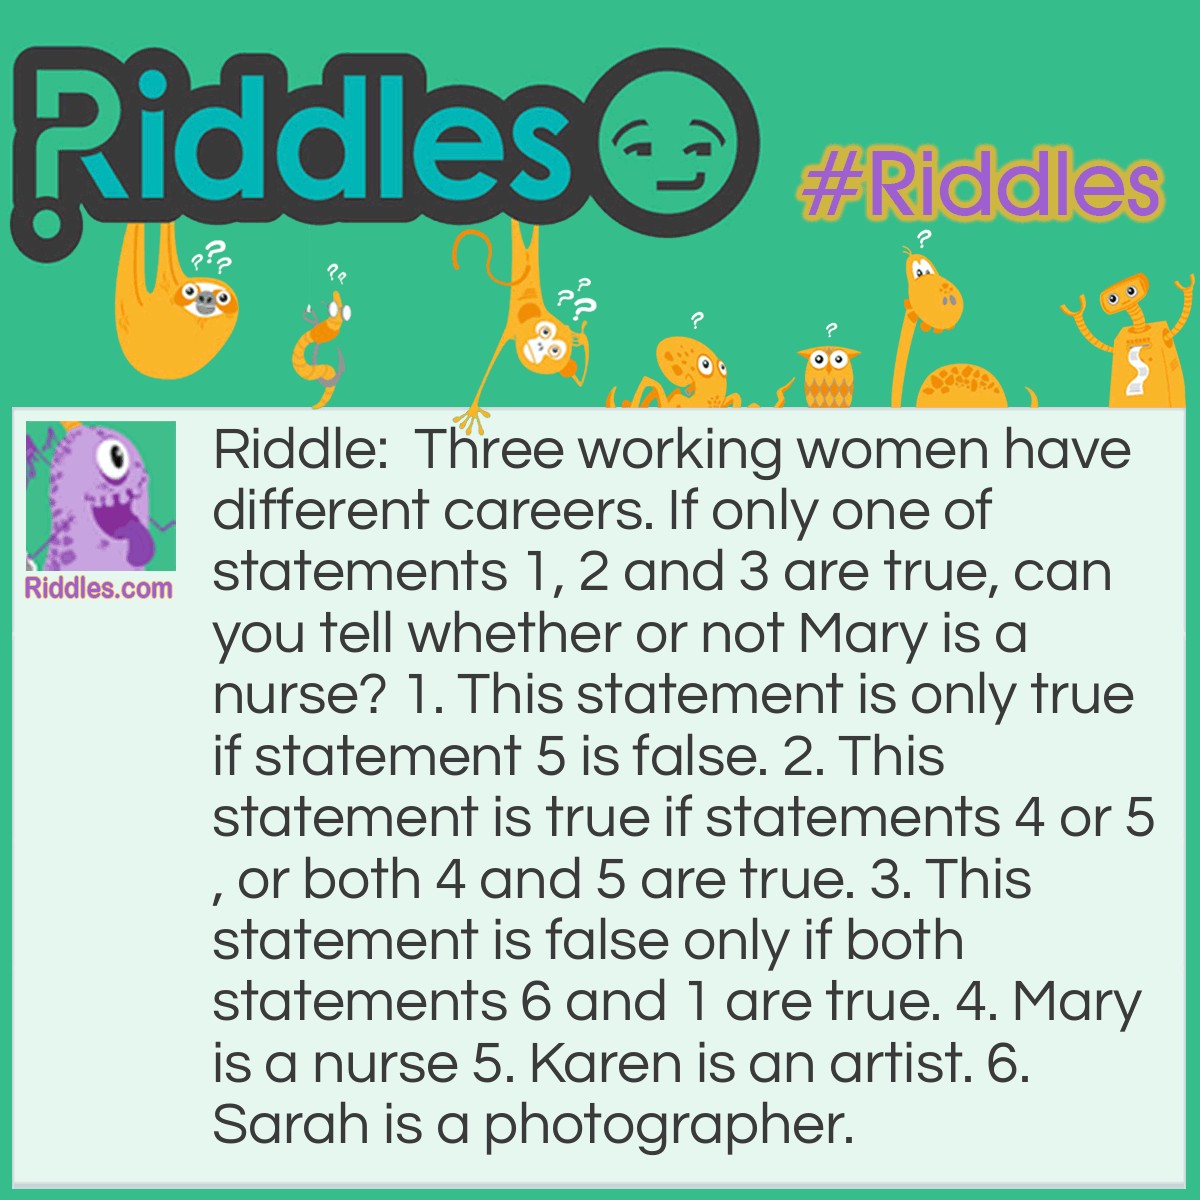 Riddle: Three working women have different careers. If only one of statements 1, 2 and 3 are true, can you tell whether or not Mary is a nurse? 1. This statement is only true if statement 5 is false. 2. This statement is true if statements 4 or 5, or both 4 and 5 are true. 3. This statement is false only if both statements 6 and 1 are true. 4. Mary is a nurse 5. Karen is an artist. 6. Sarah is a photographer. Answer: Mary is not a nurse. The way to solve this riddle is to consider statements 4, 5, and 6 and create a chart of all possible true and false answers. Next, fill in the chart according to statements 1 through 3. You will discover that there is only one line where only one of the statements one, two, and three are true. Thus, it is determined that: Statements 4 and 5 are false and statement 6 is true.